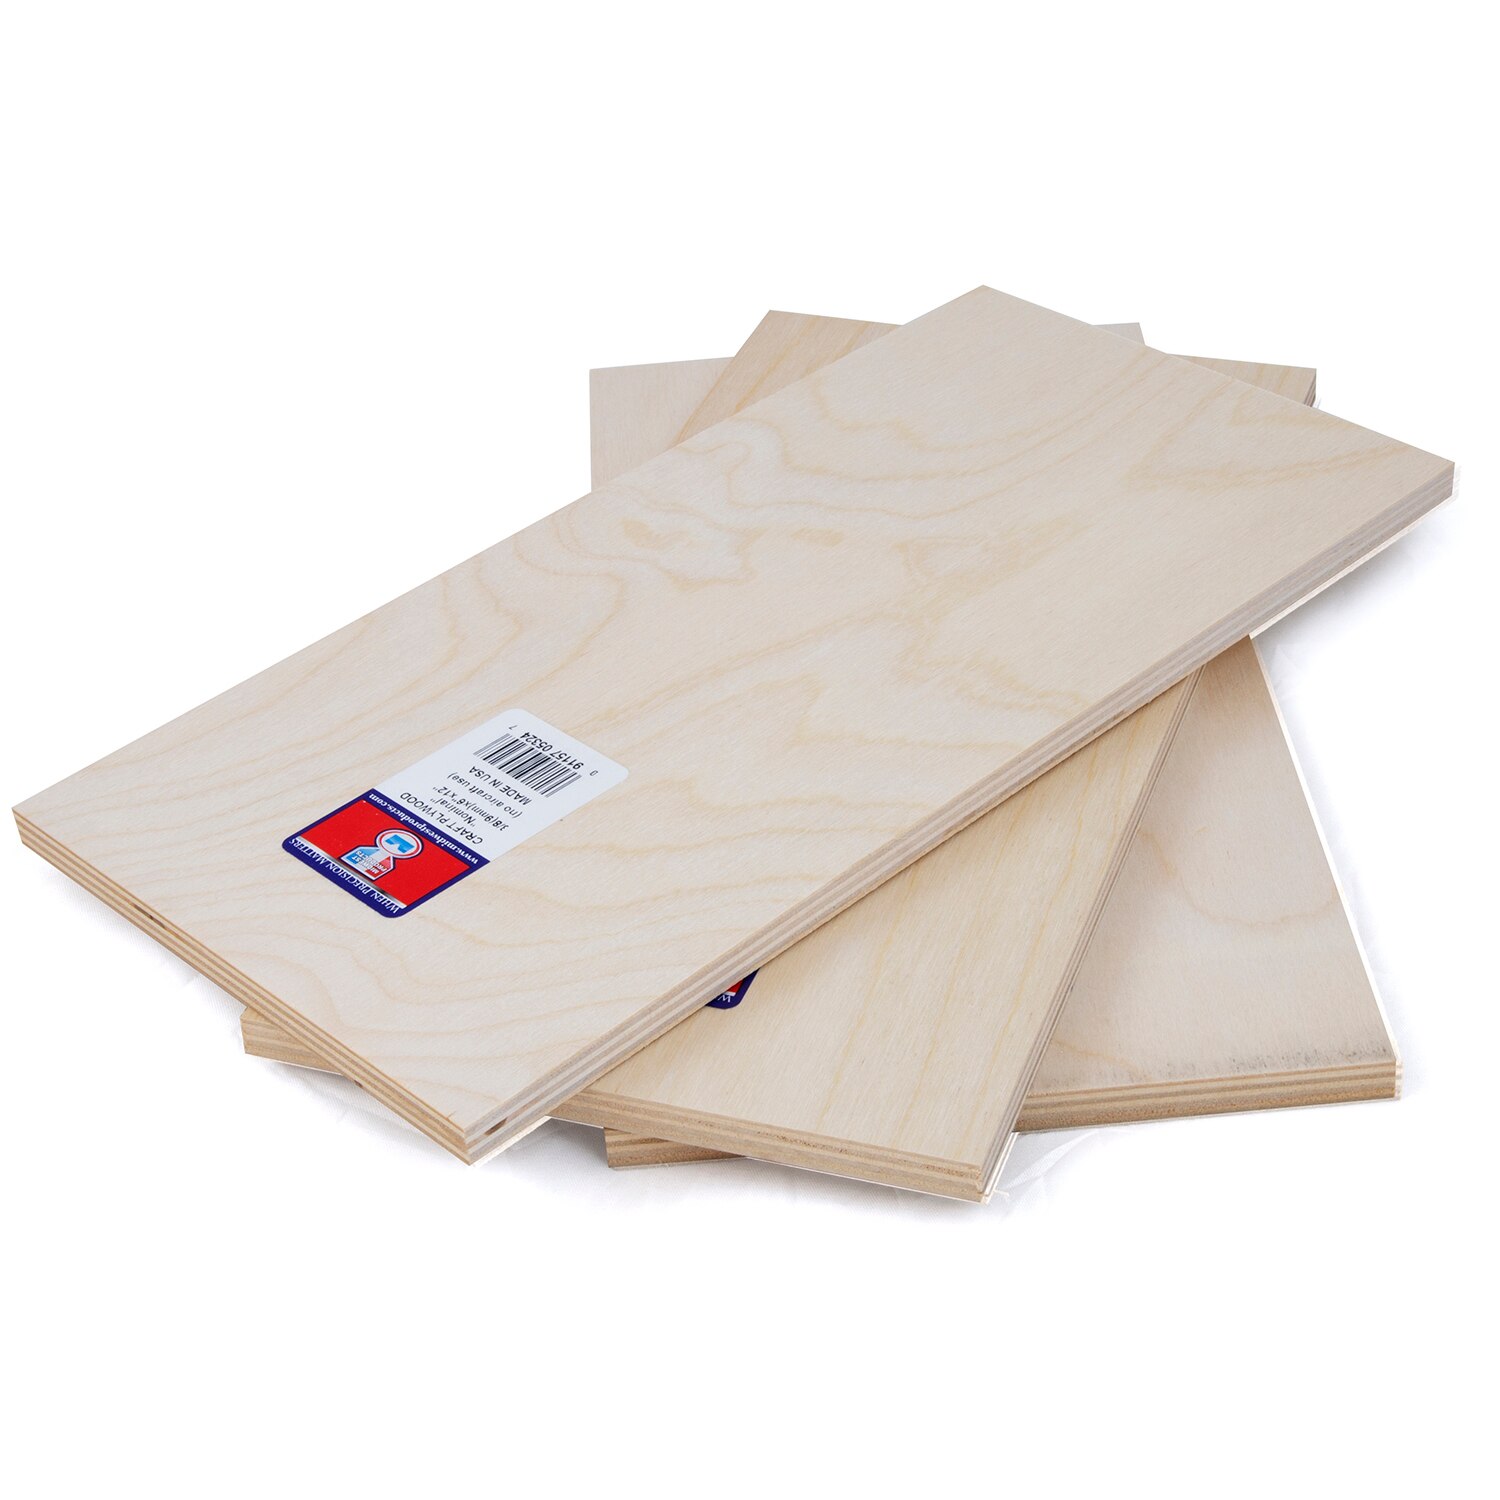 Midwest Craft Plywood Sheet, 3/8" Thickness, 6" x 12"